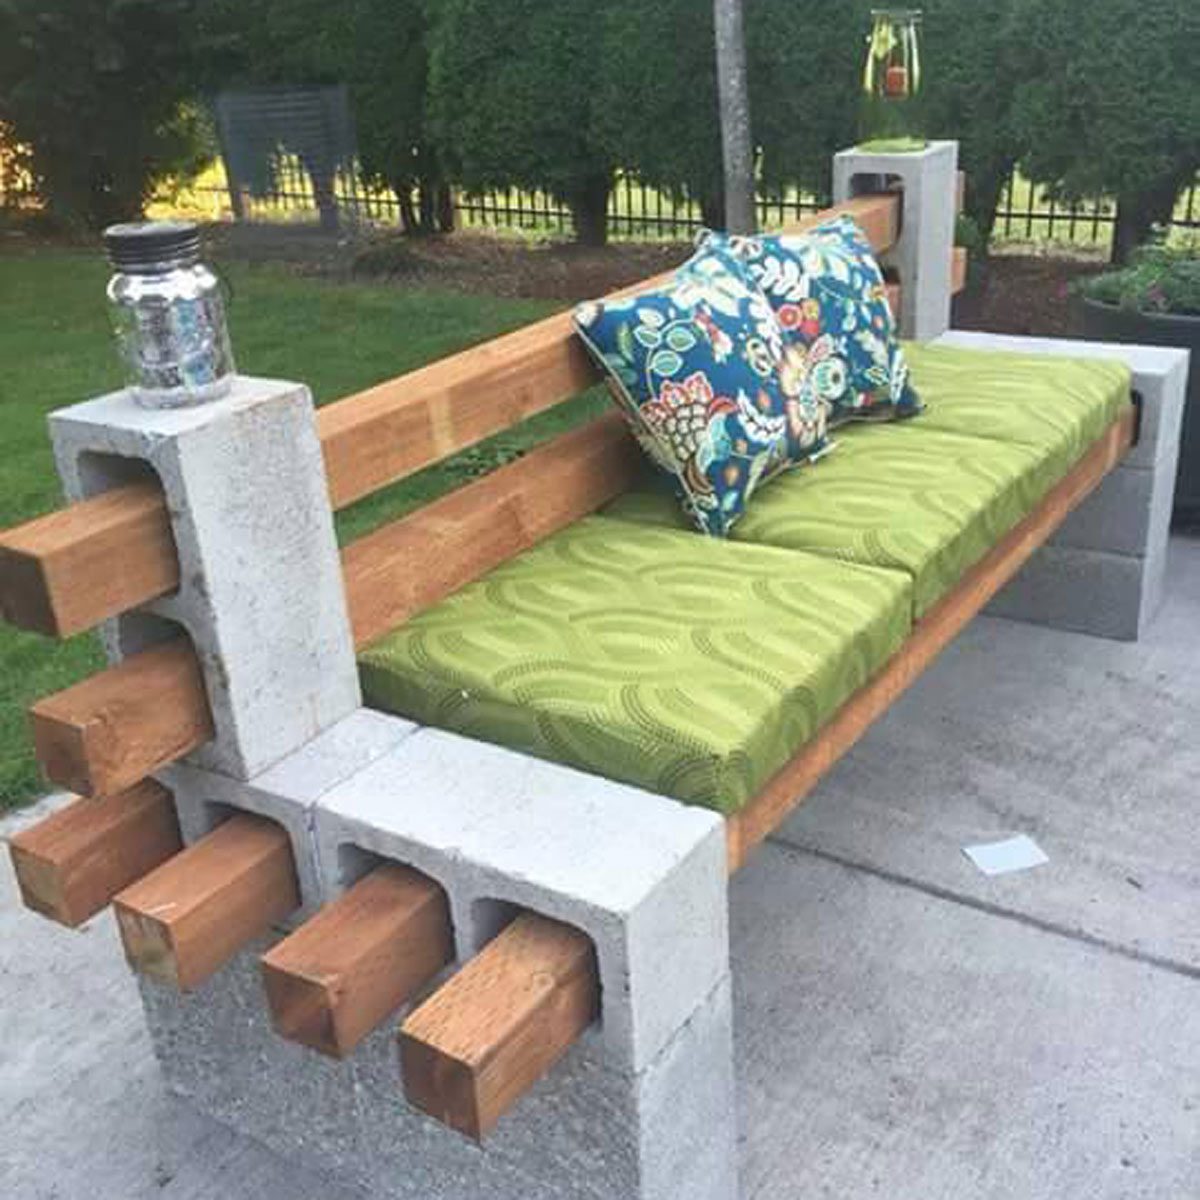 10 Surprising Things You Can Do with Concrete Blocks